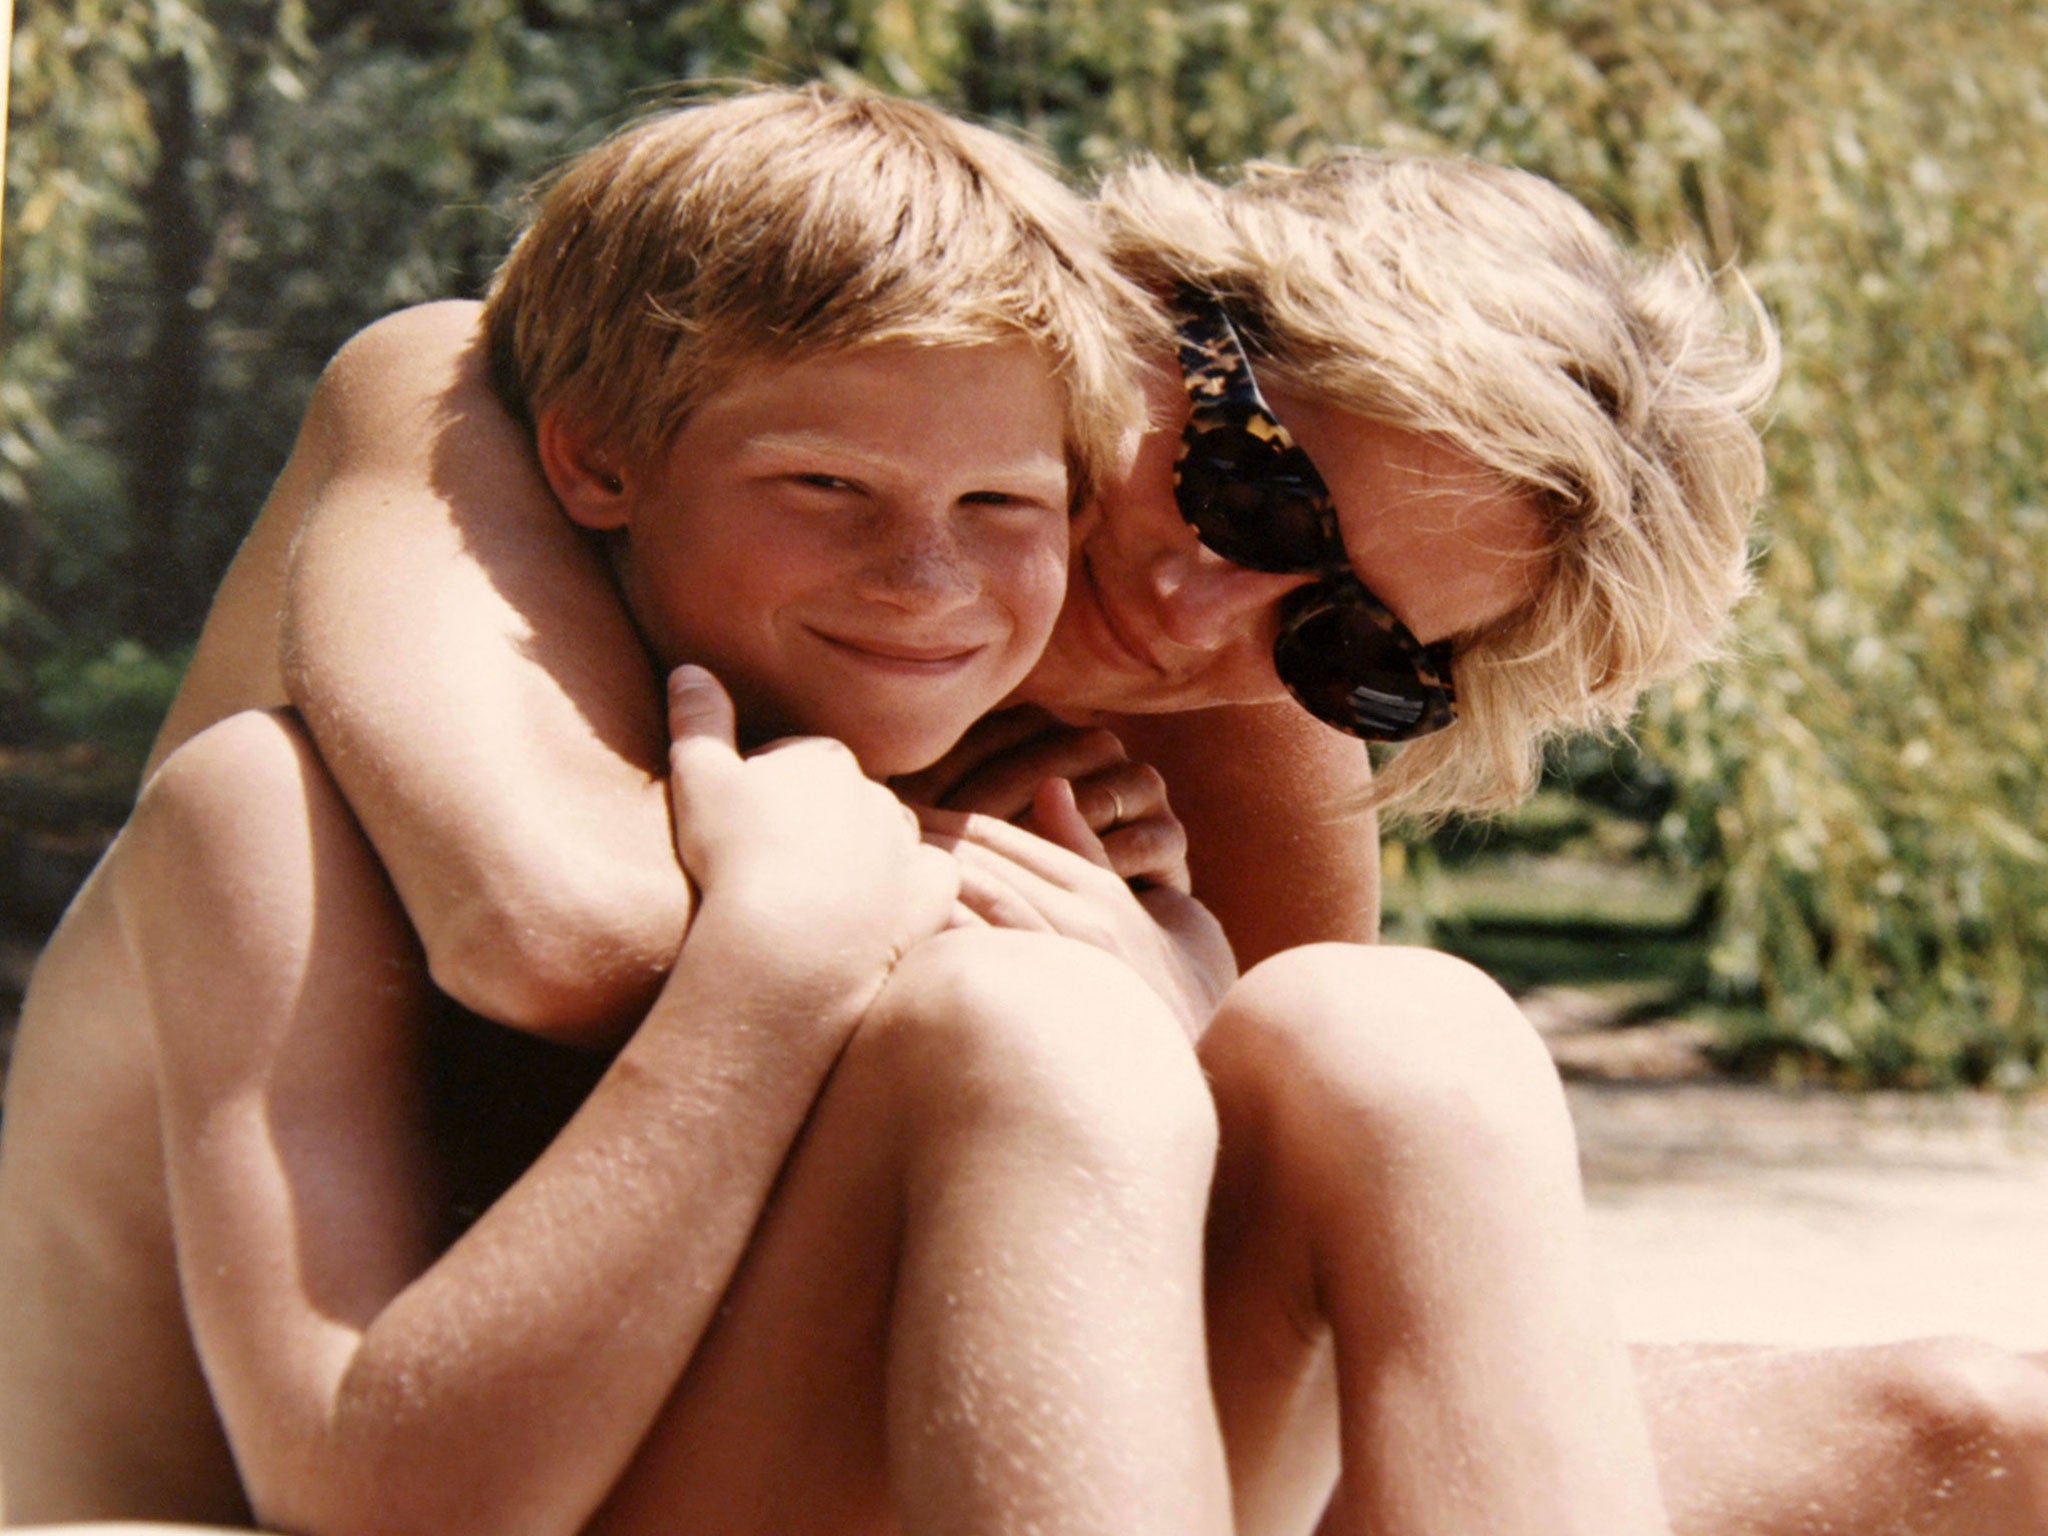 An undated handout picture released by Kensington Palace from the personal photo album of the late Diana, Princess of Wales shows her embracing Prince Harry while on holiday at an undisclosed location